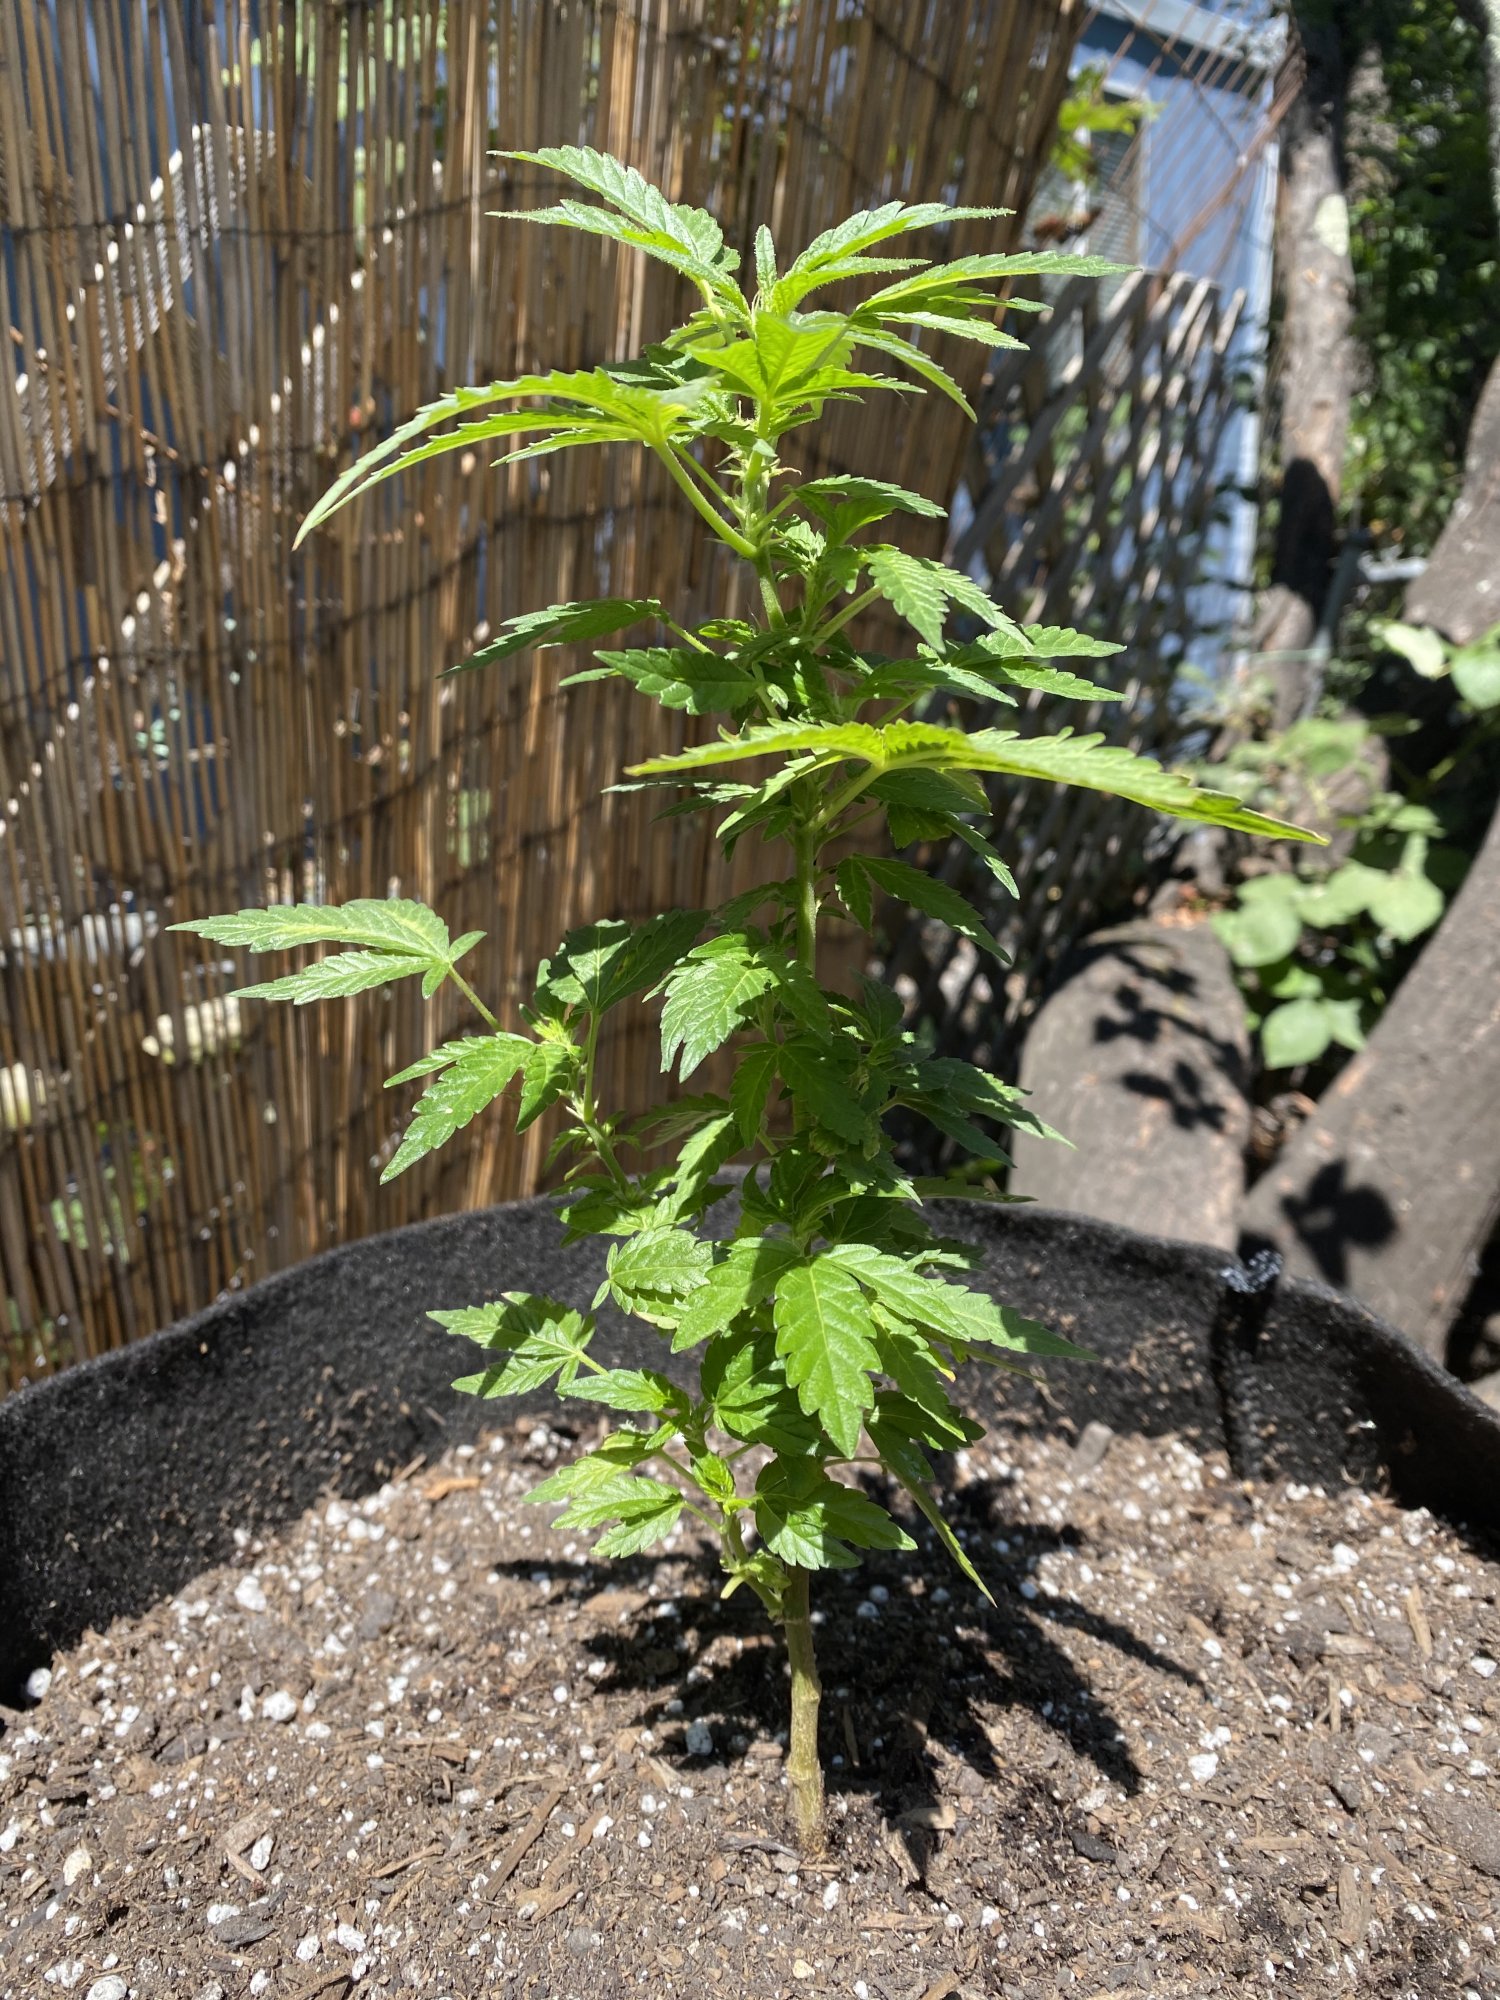 New outdoor grower looking for advice 5